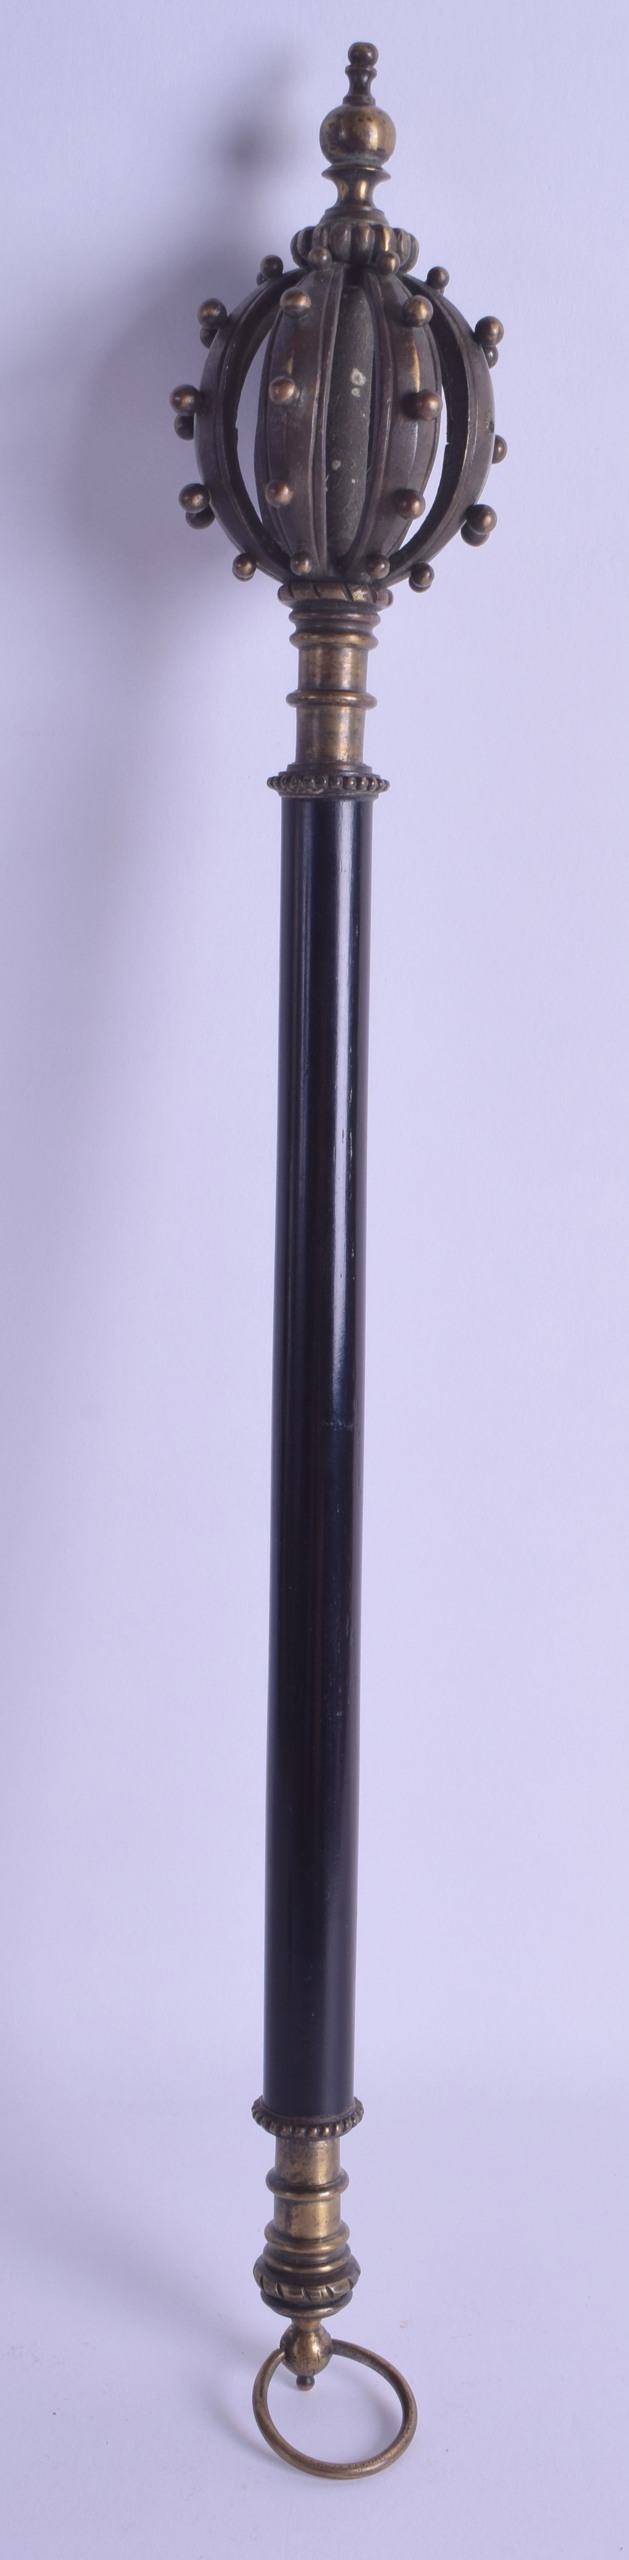 A 19TH CENTURY EUROPEAN BRONZE AND EBONY MACE with open work crown like finial. 46 cm long. - Image 3 of 3